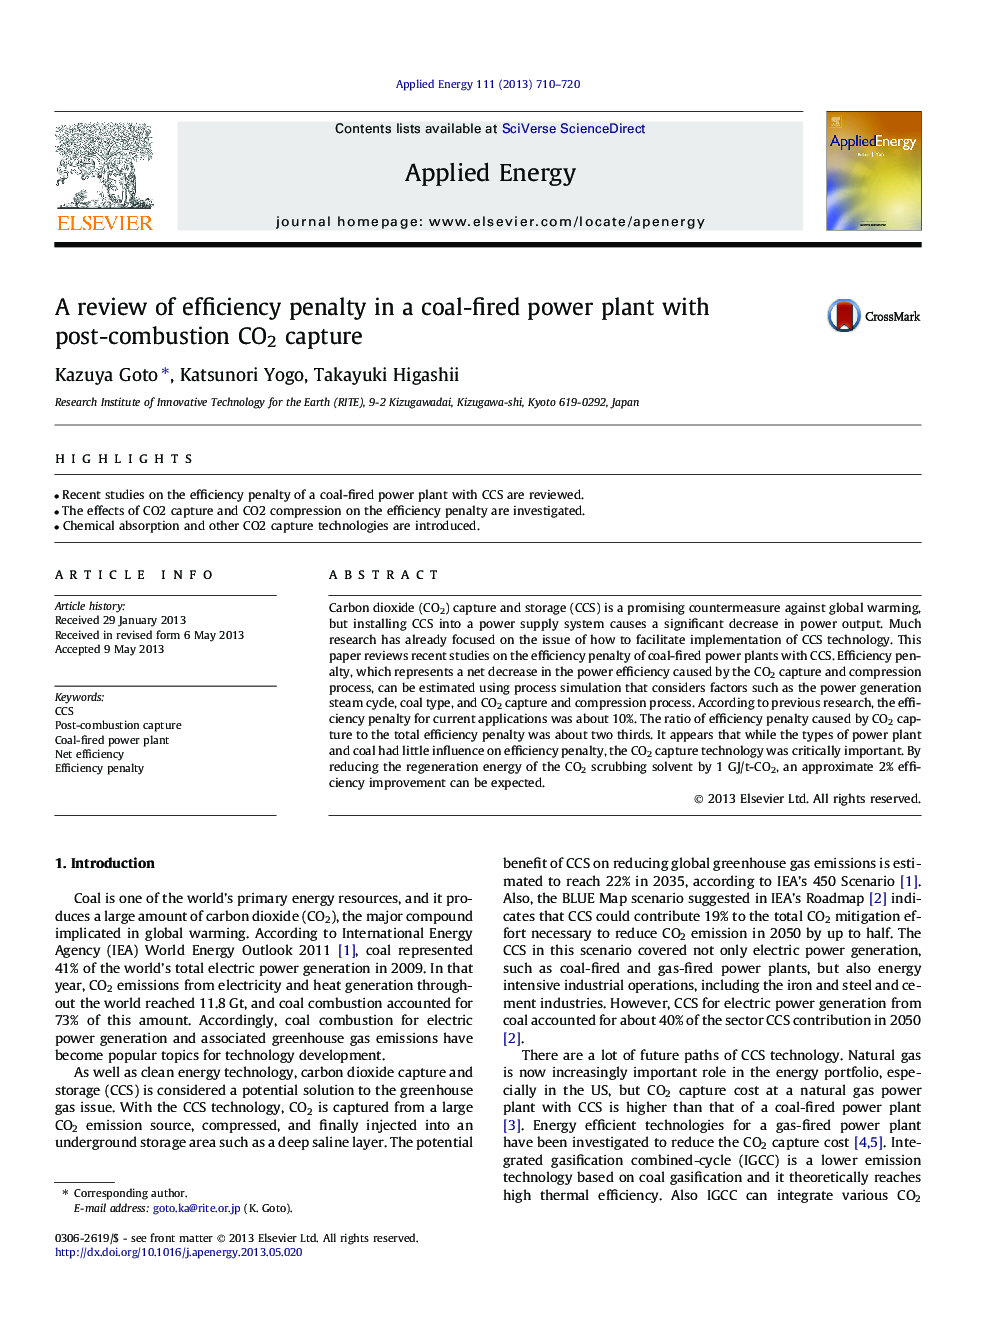 A review of efficiency penalty in a coal-fired power plant with post-combustion CO2 capture